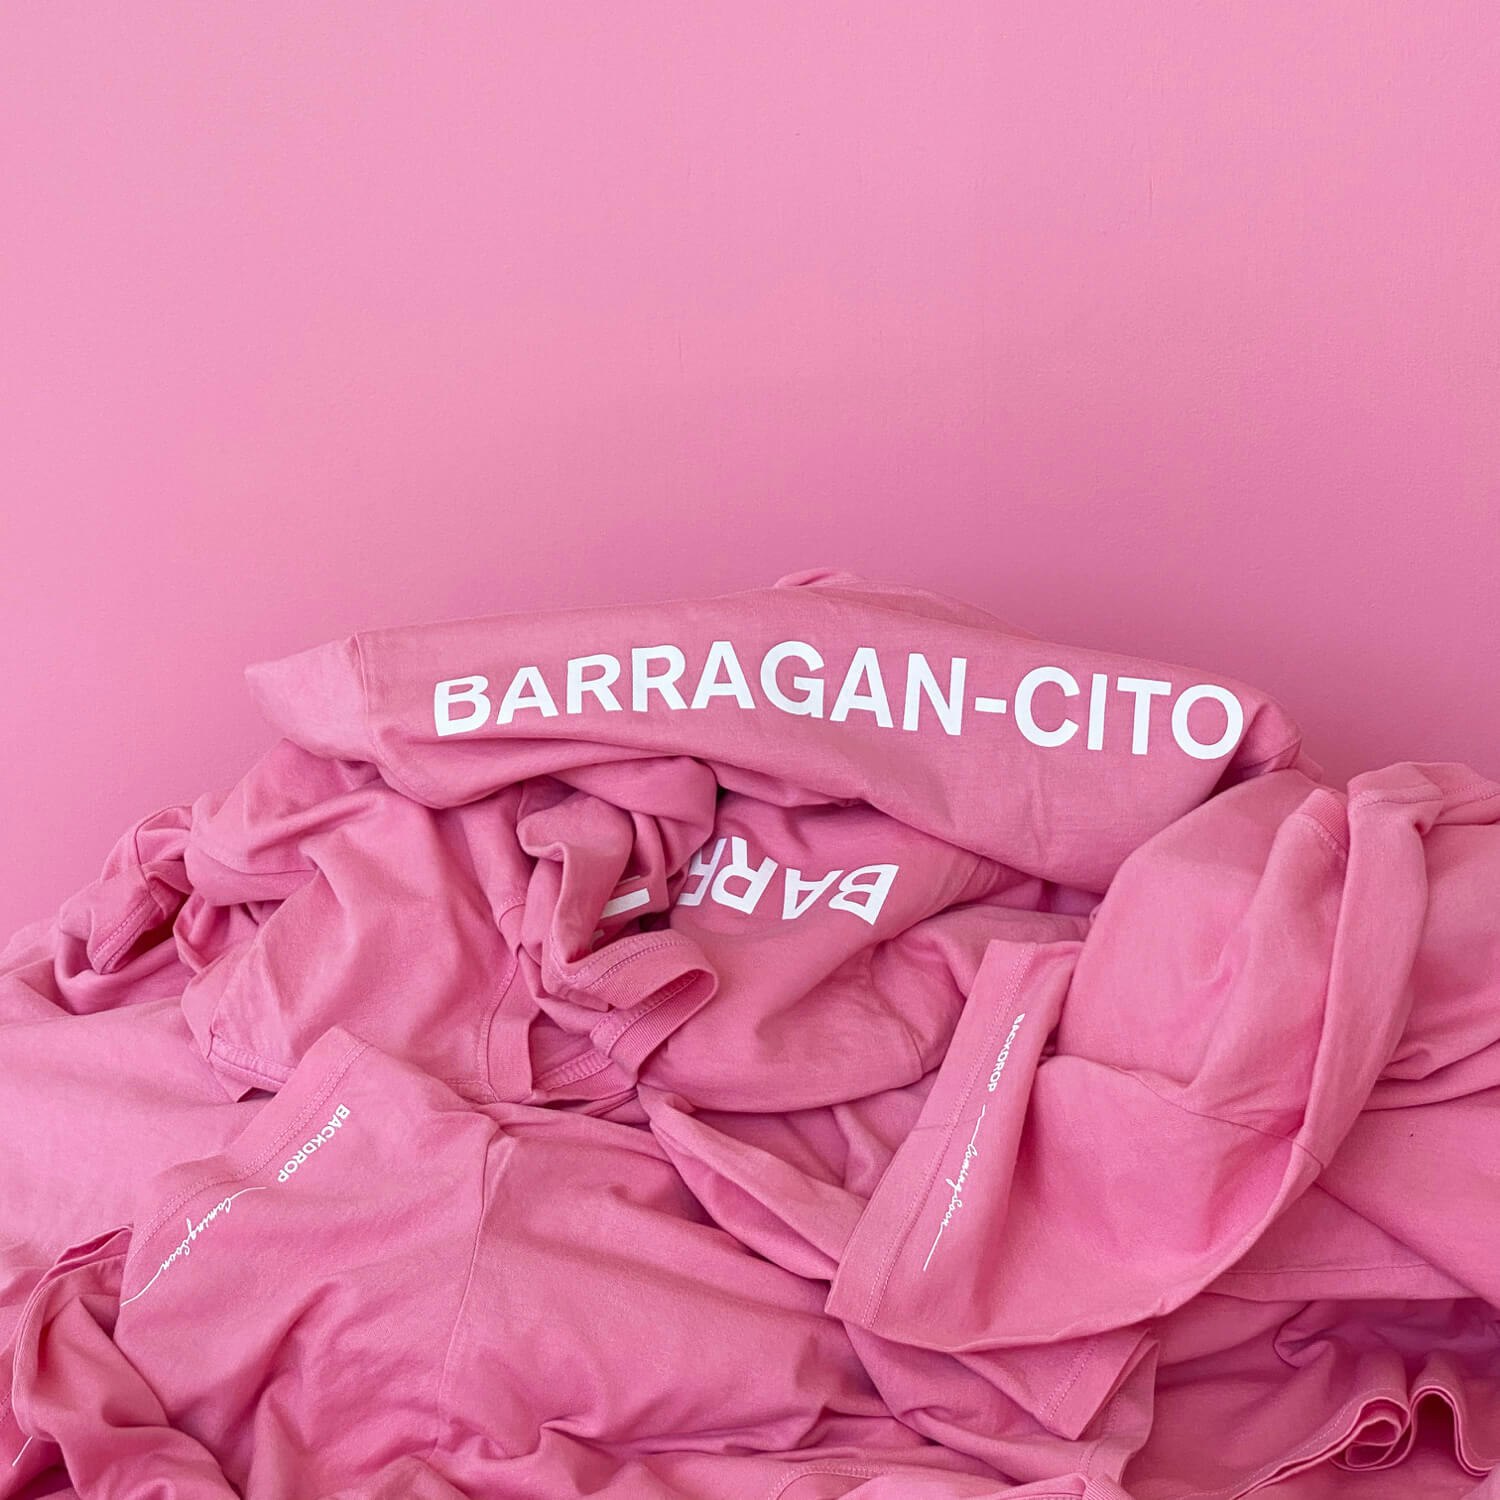 BARRAGÁN-CITO painted on a wall with pink t-shirts in front of it